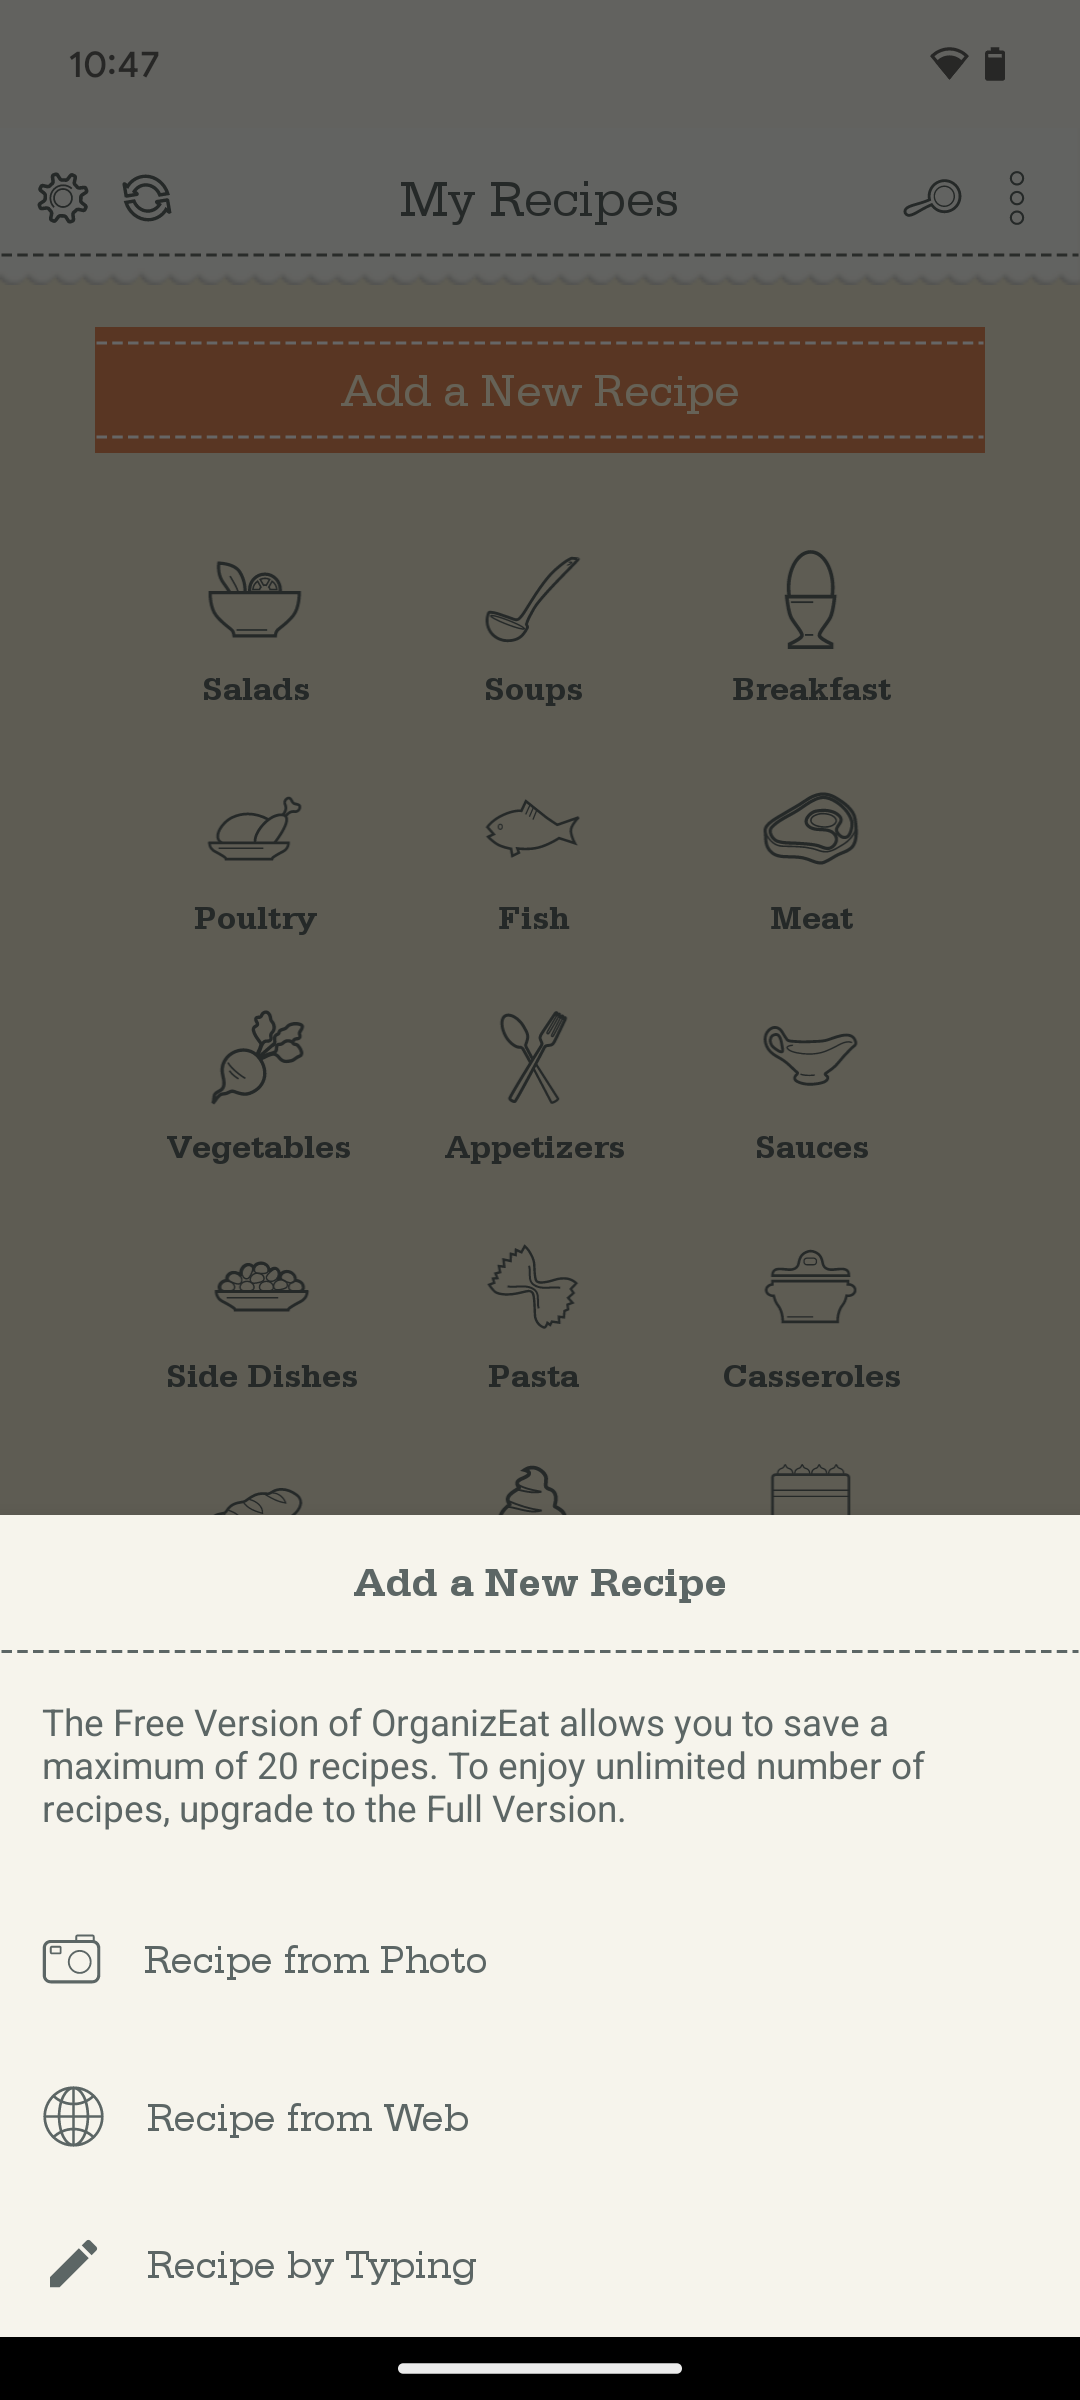 Adding a recipe in the OrganizEat Android app